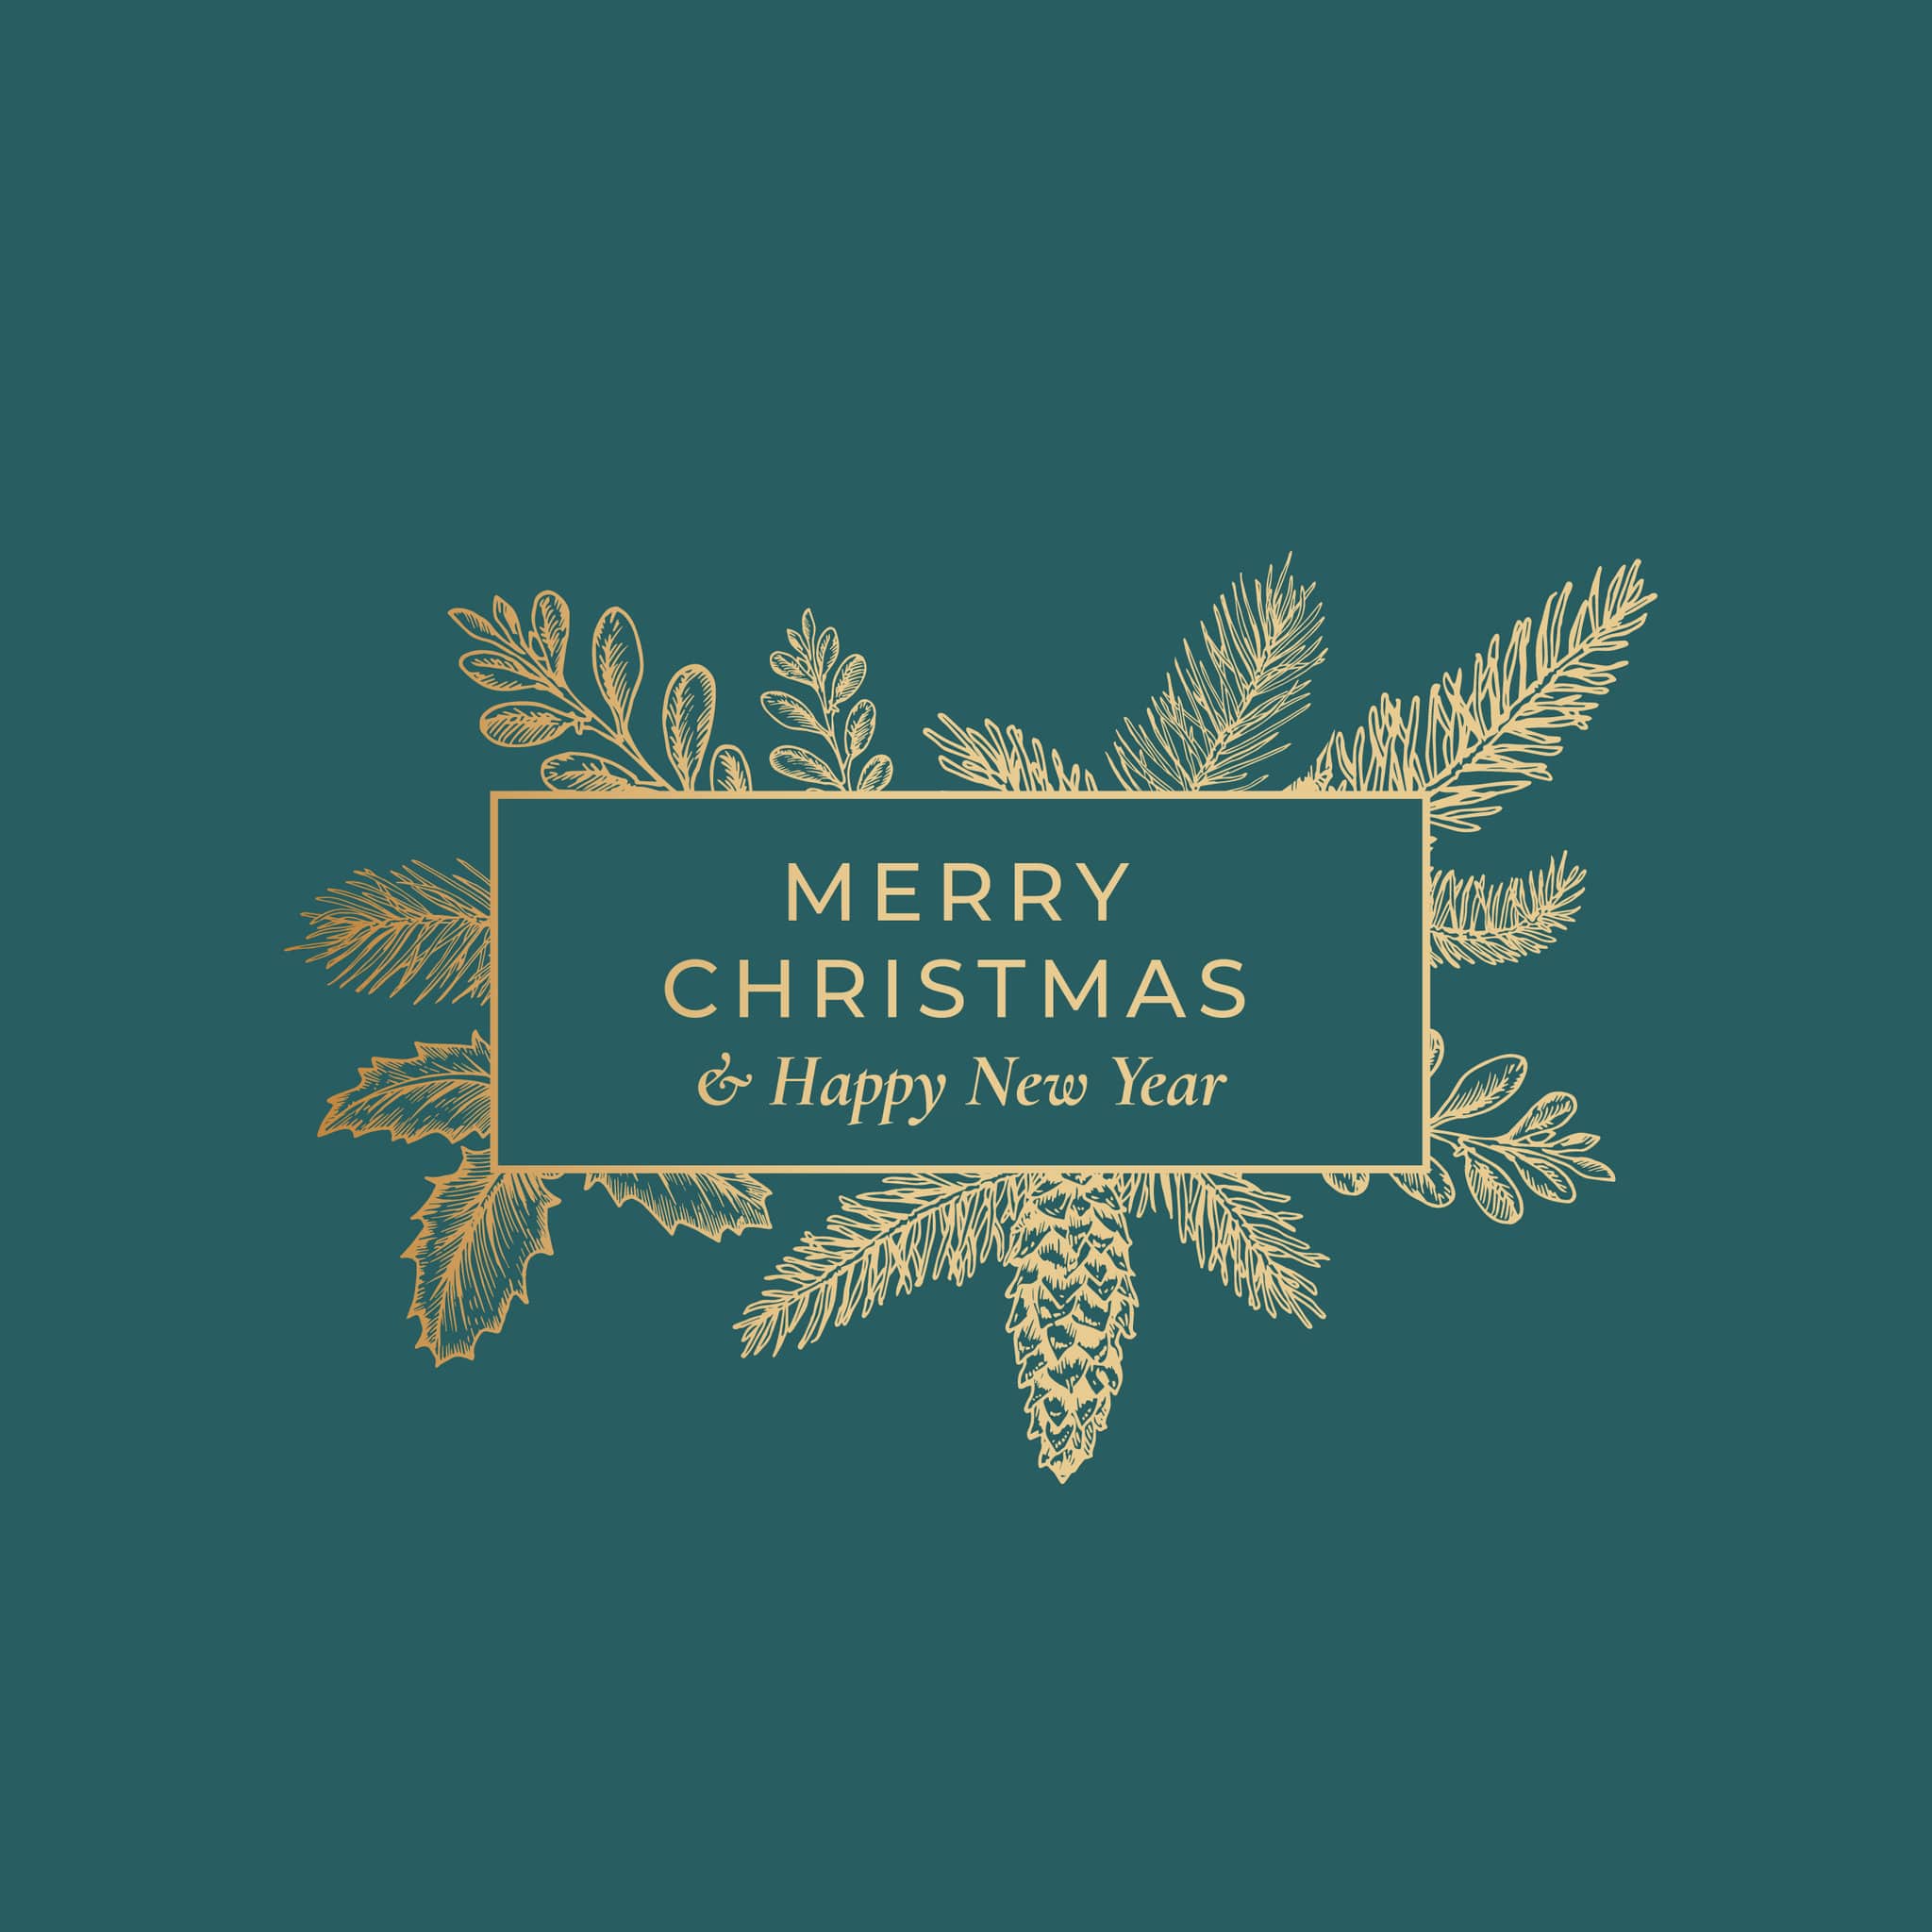 Merry Christmas Abstract Botanical Card with Rectangle Frame Banner and Modern Typography. Premium Green Background and Golden Greeting Sketch Layout